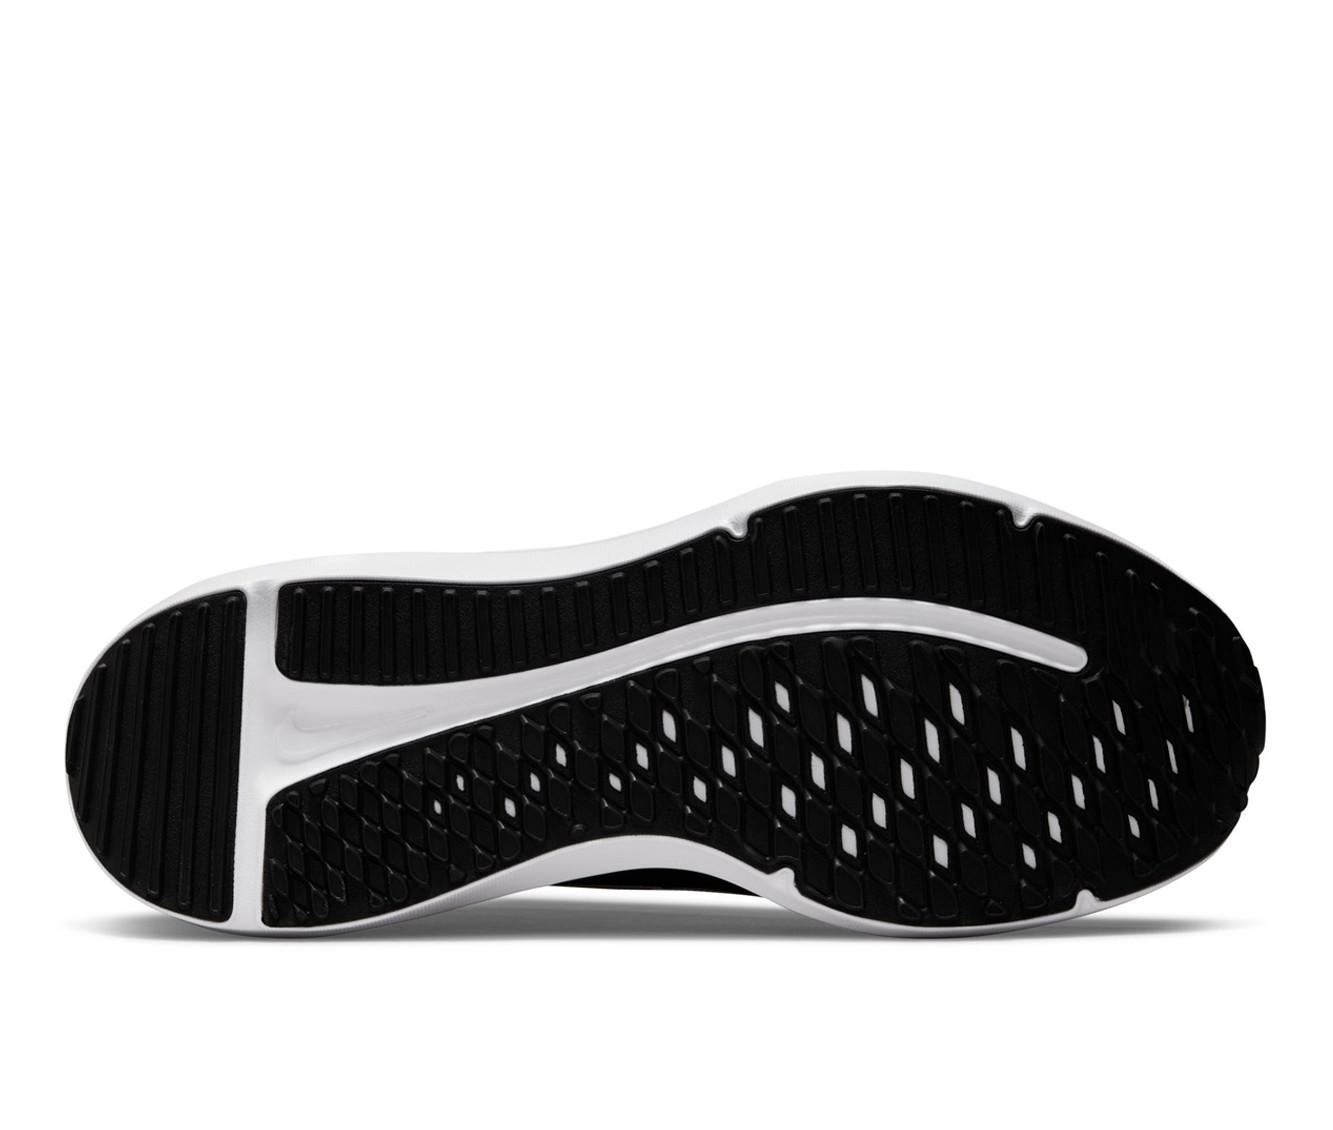 Men's Nike Downshifter 12 Sustainable Running Shoes | Shoe Carnival